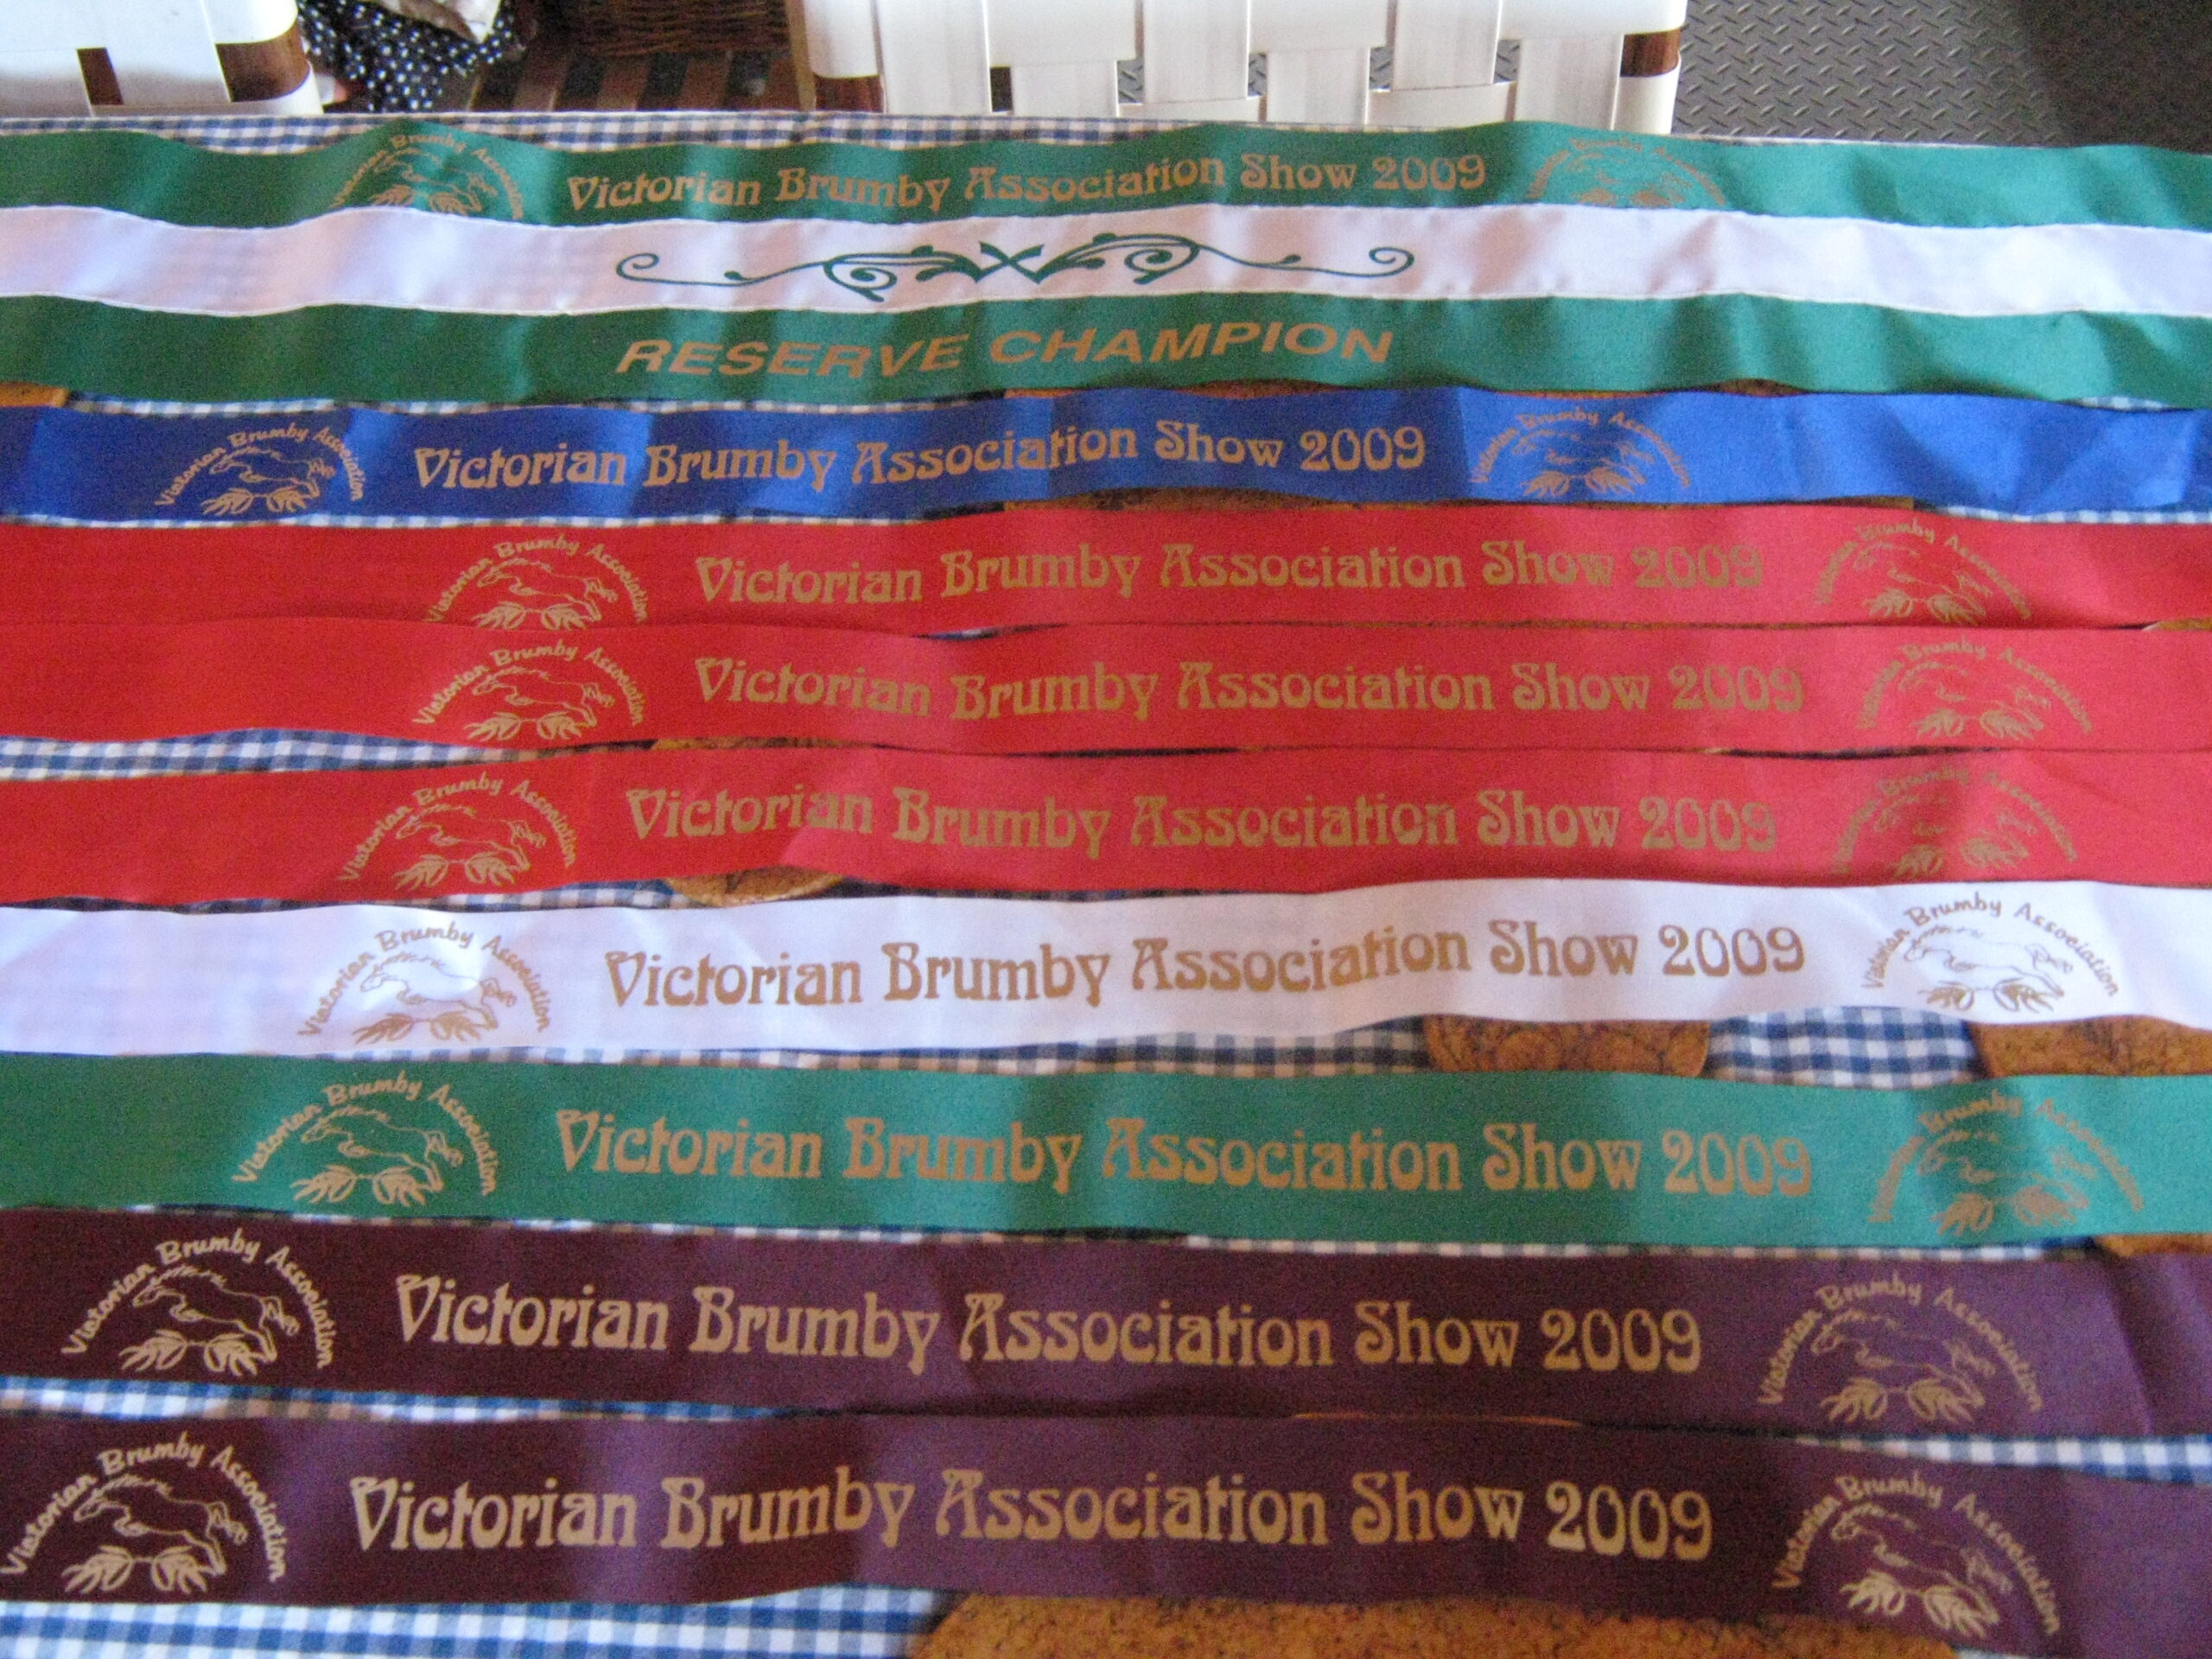 Brumby Show 2009 ribbons